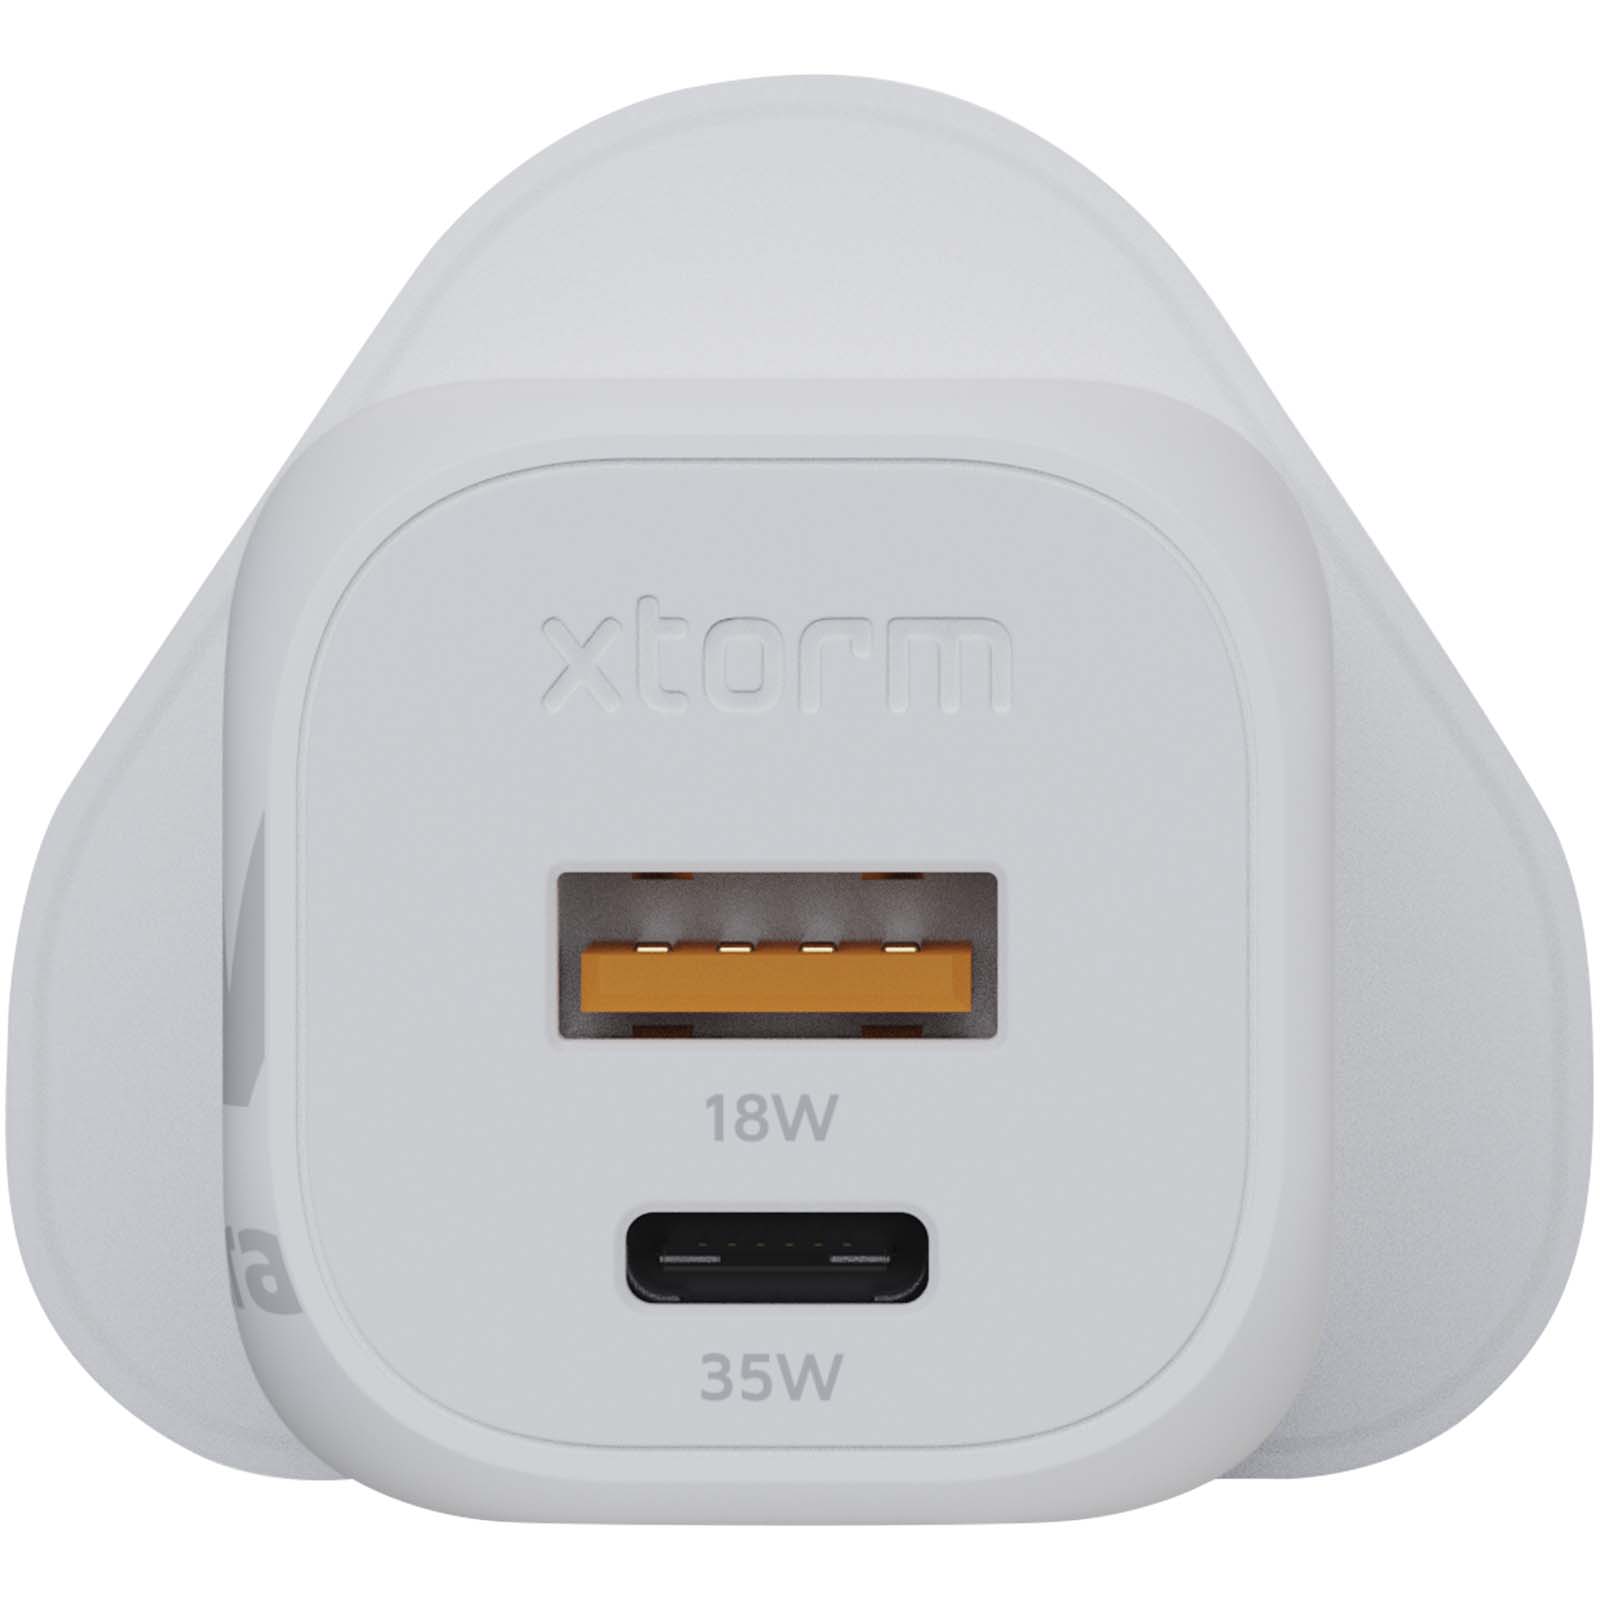 Advertising Chargers - Xtorm XEC035 GaN² Ultra 35W wall charger - UK plug - 1